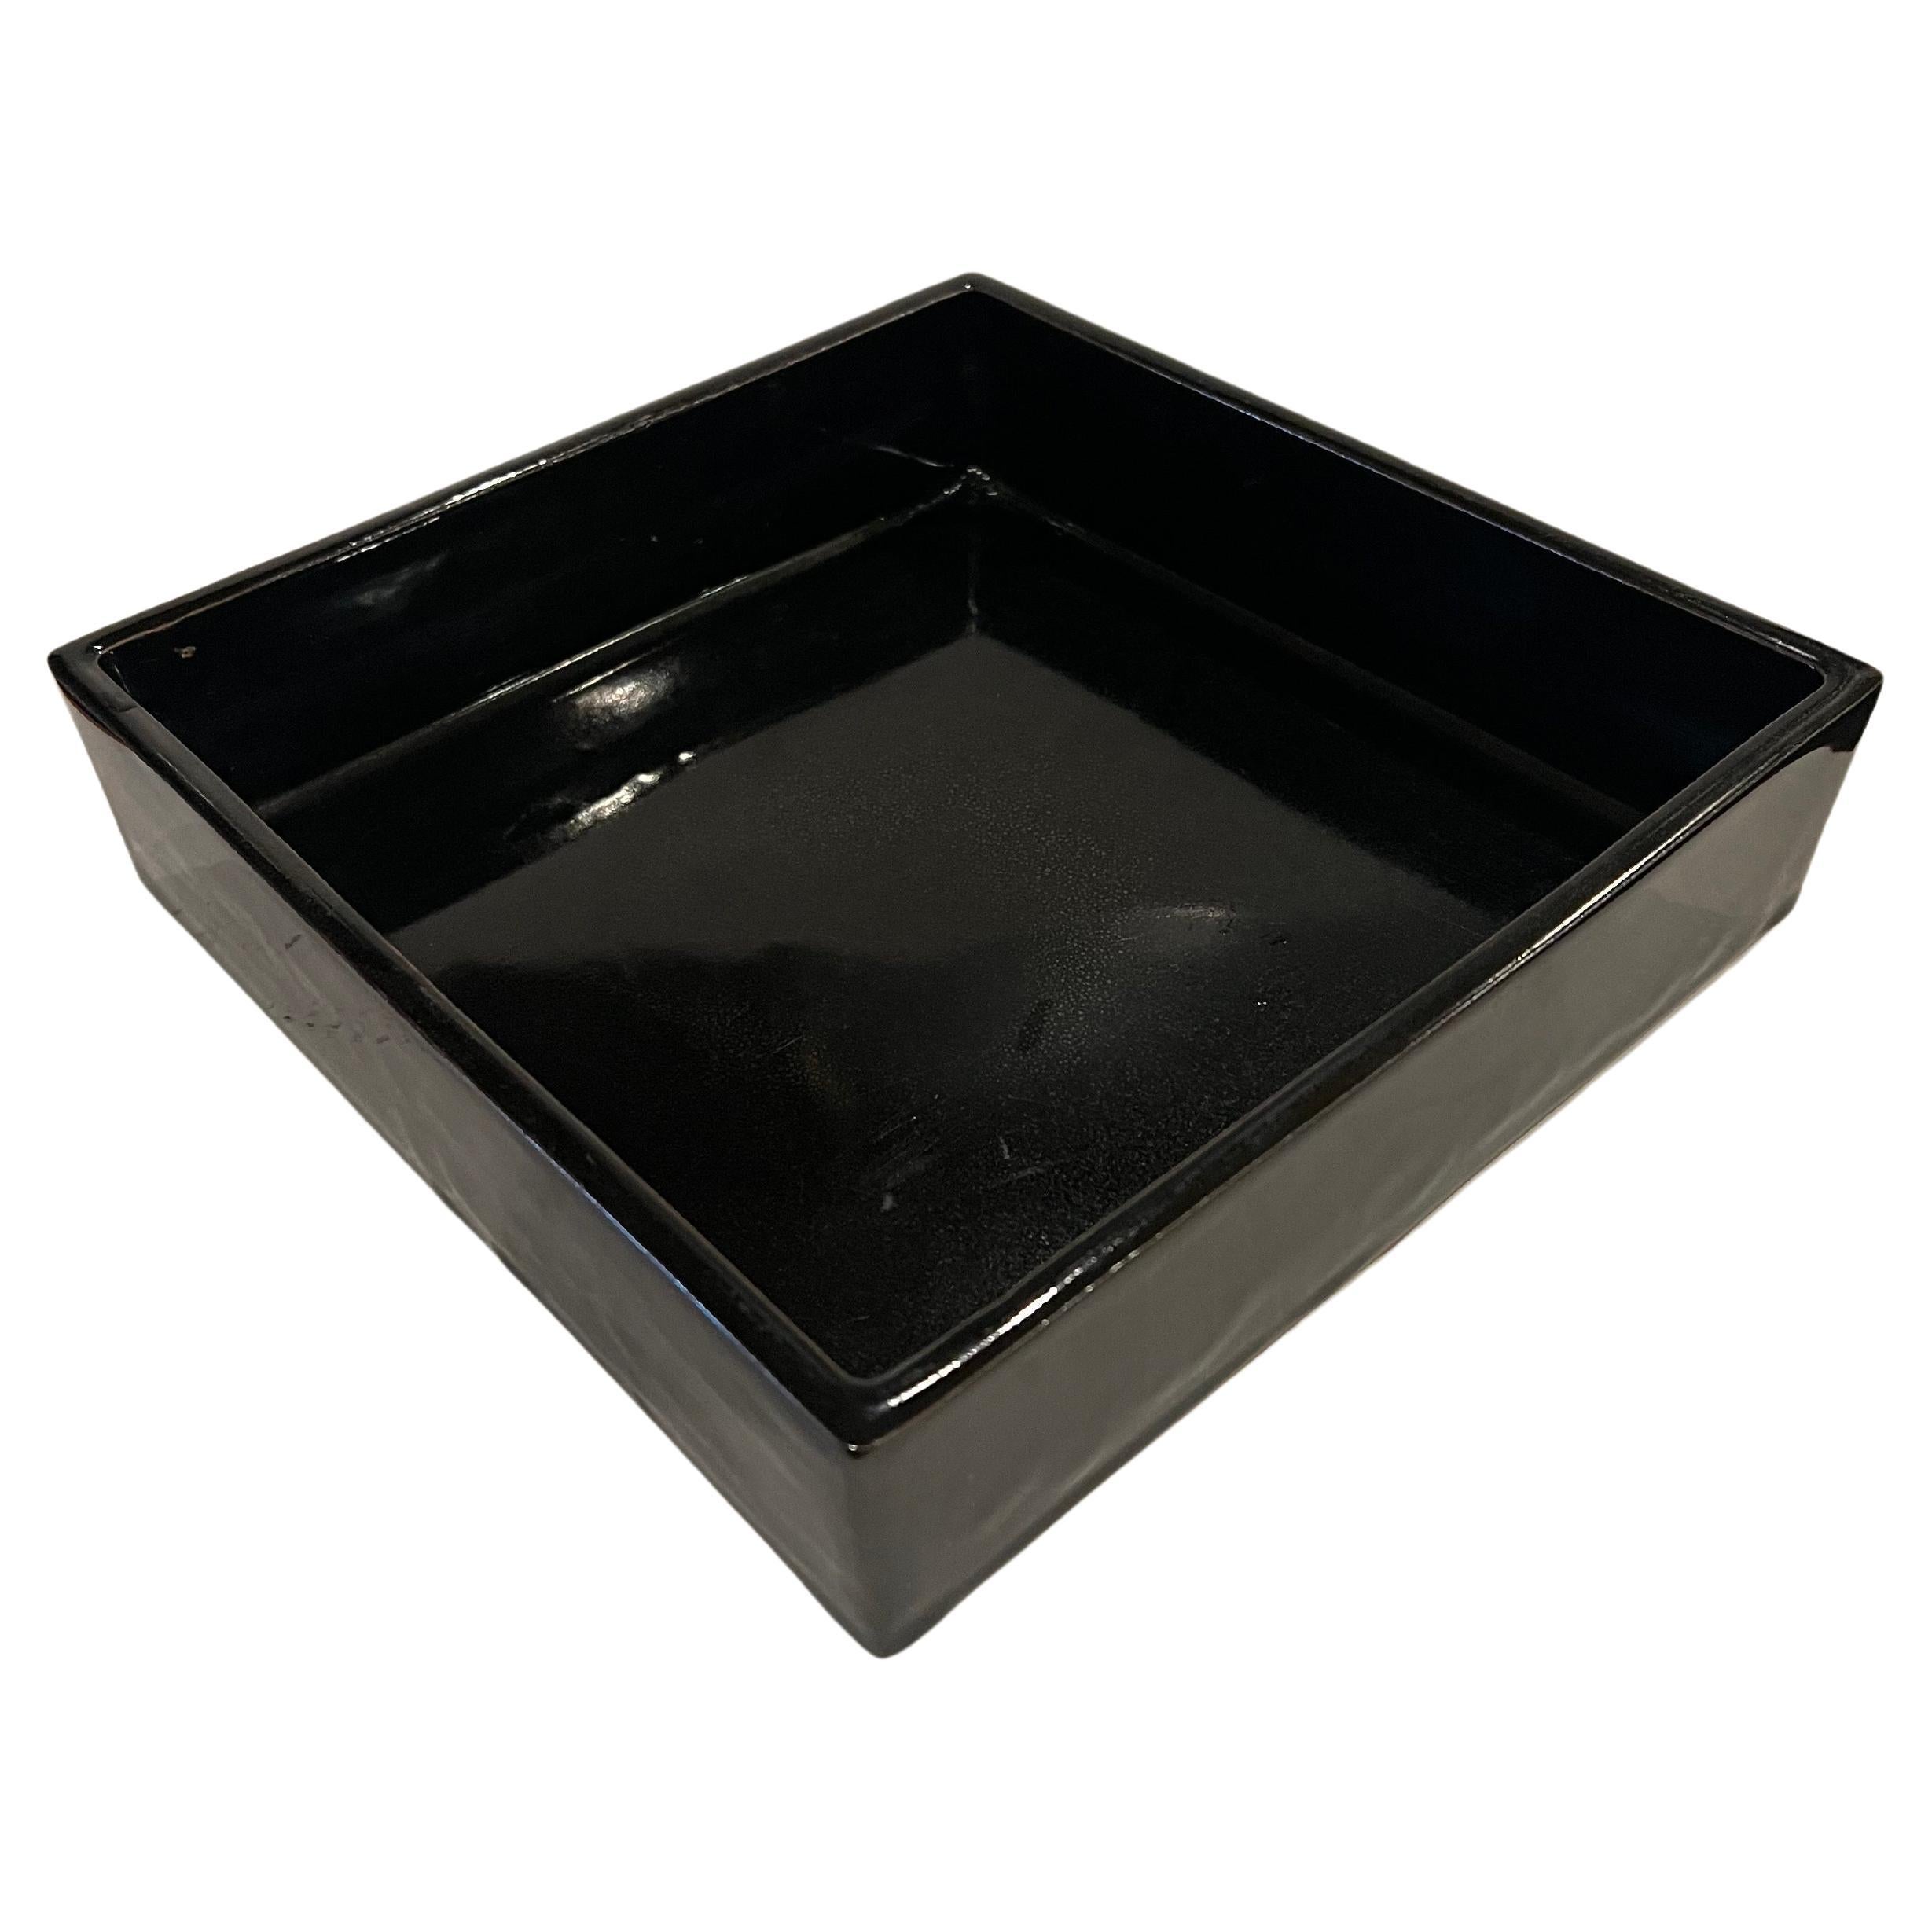 Beautiful black glossy glaze, design, and shape on this ceramic, square shape Ikebana bowl or planter. Stamped in the bottom no chips or cracks.